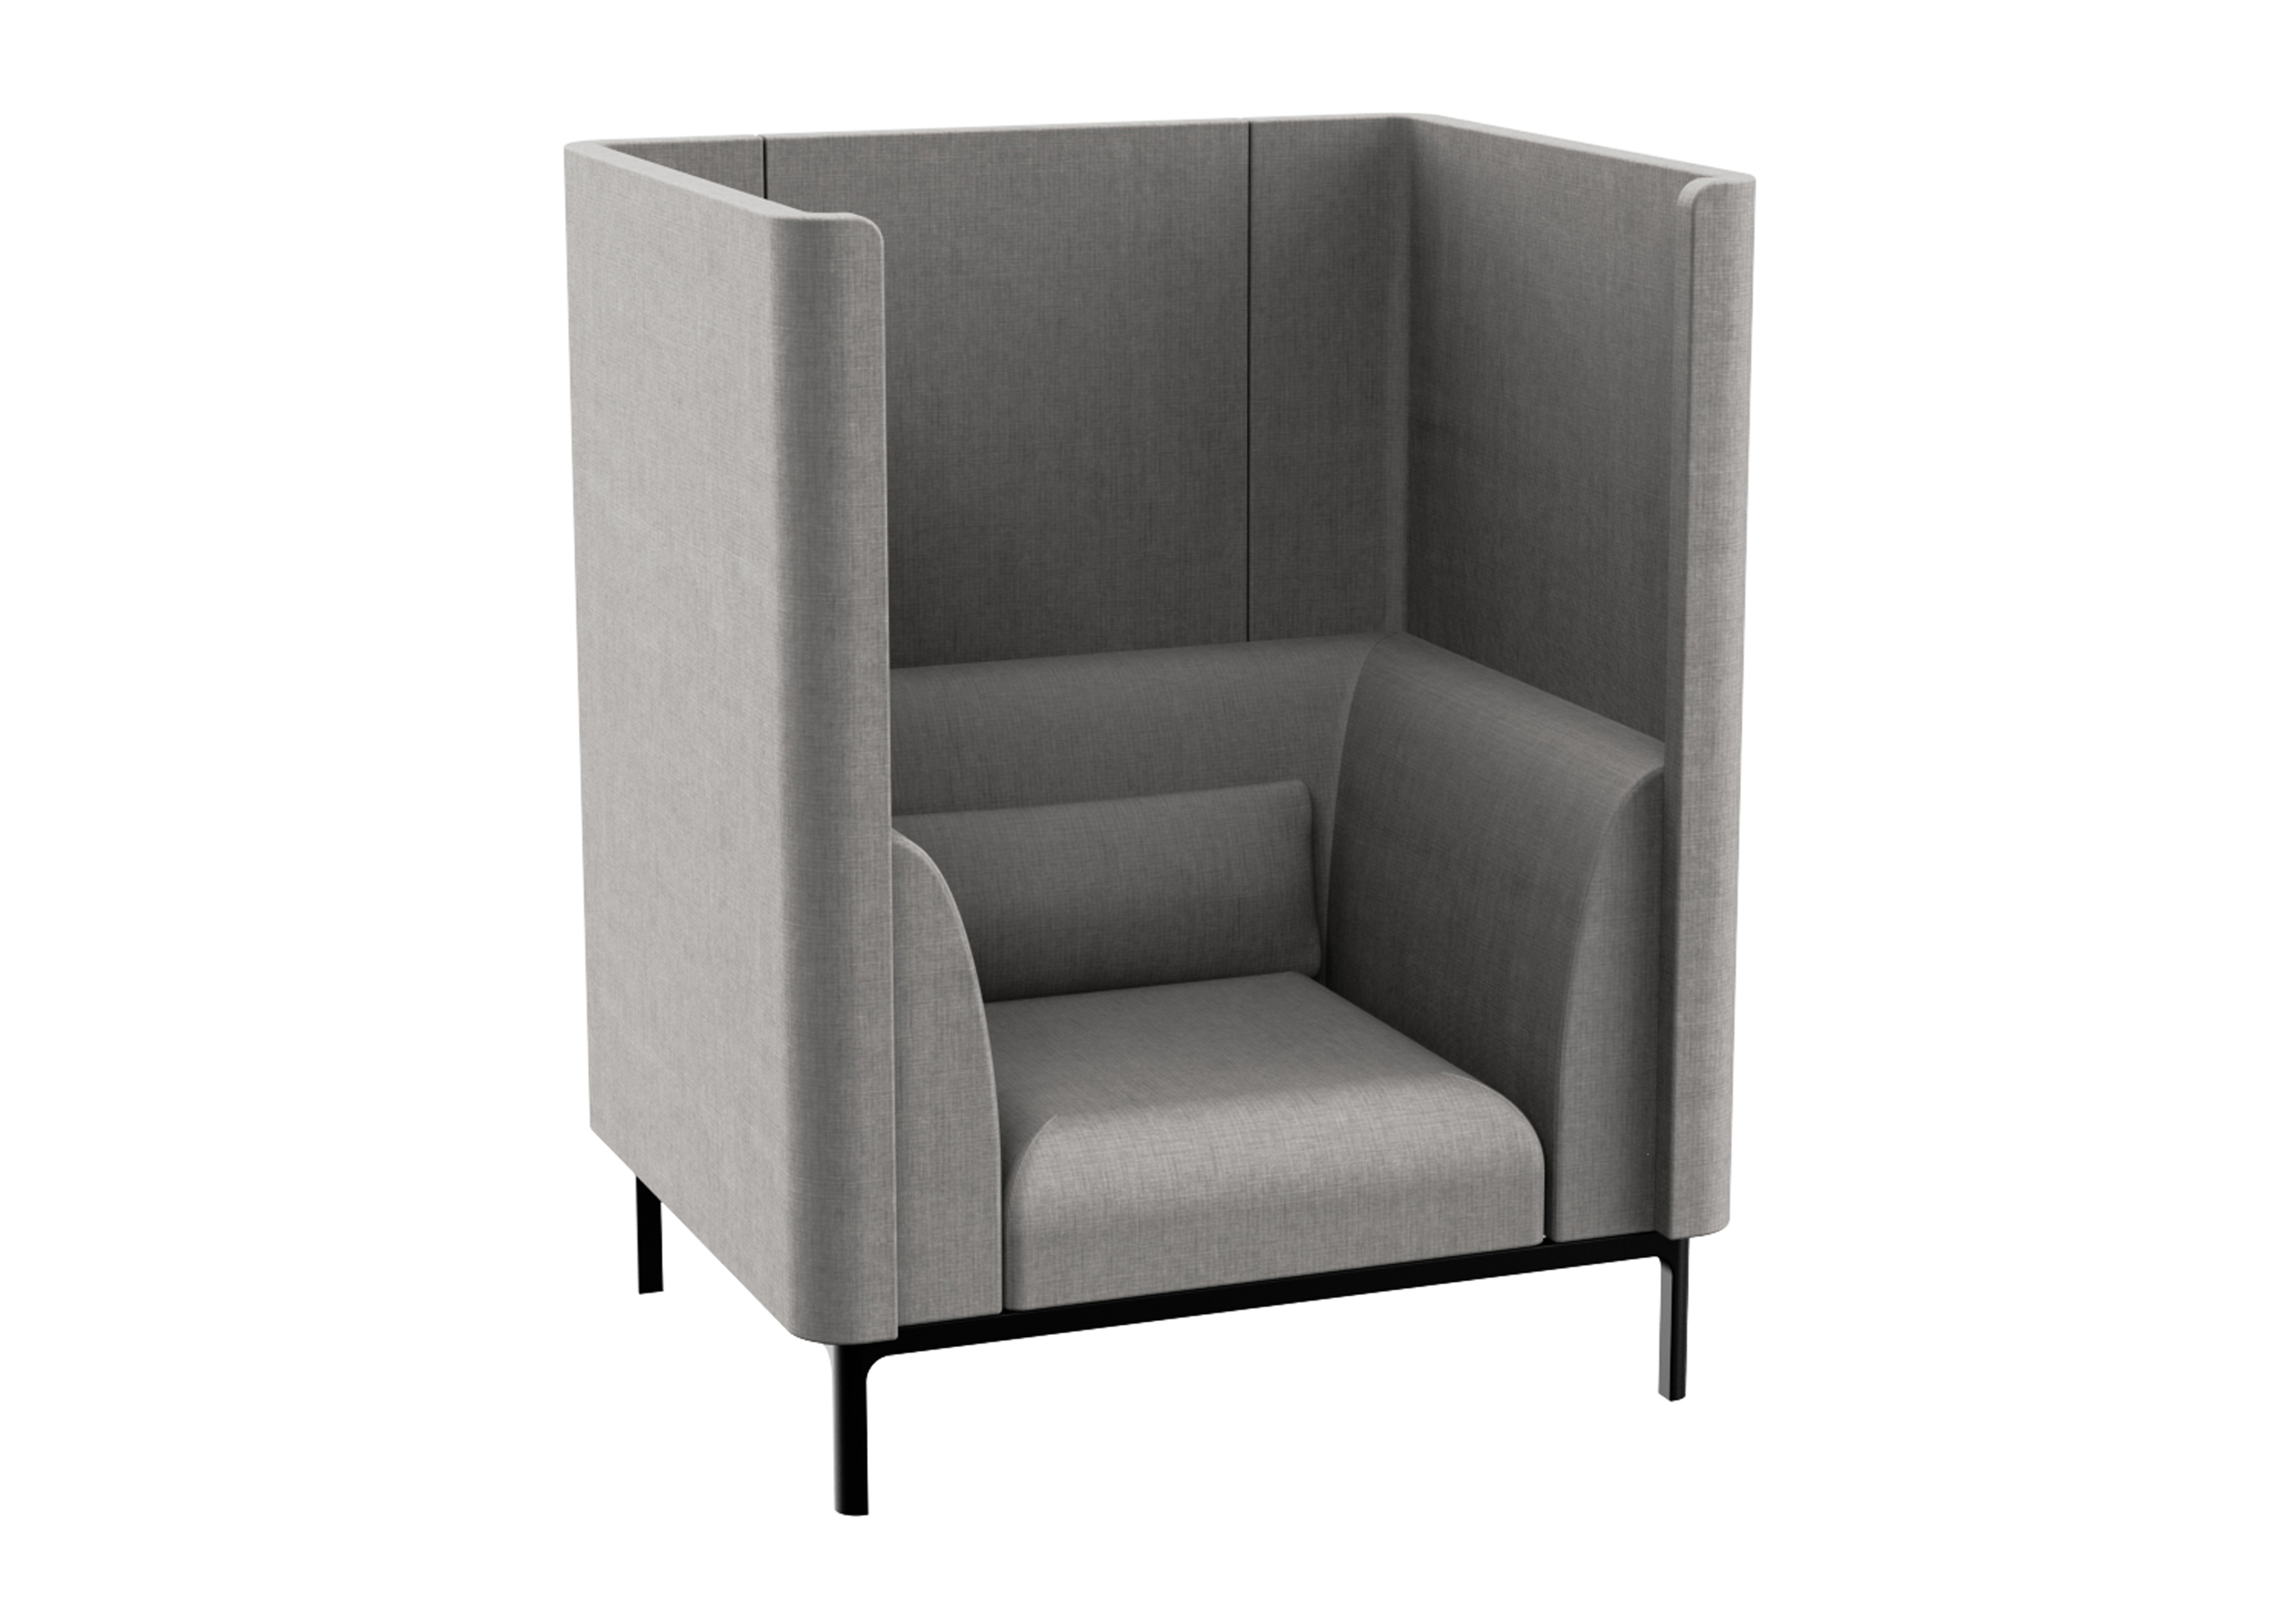 WS - Profile High Back - 1 Seater 2